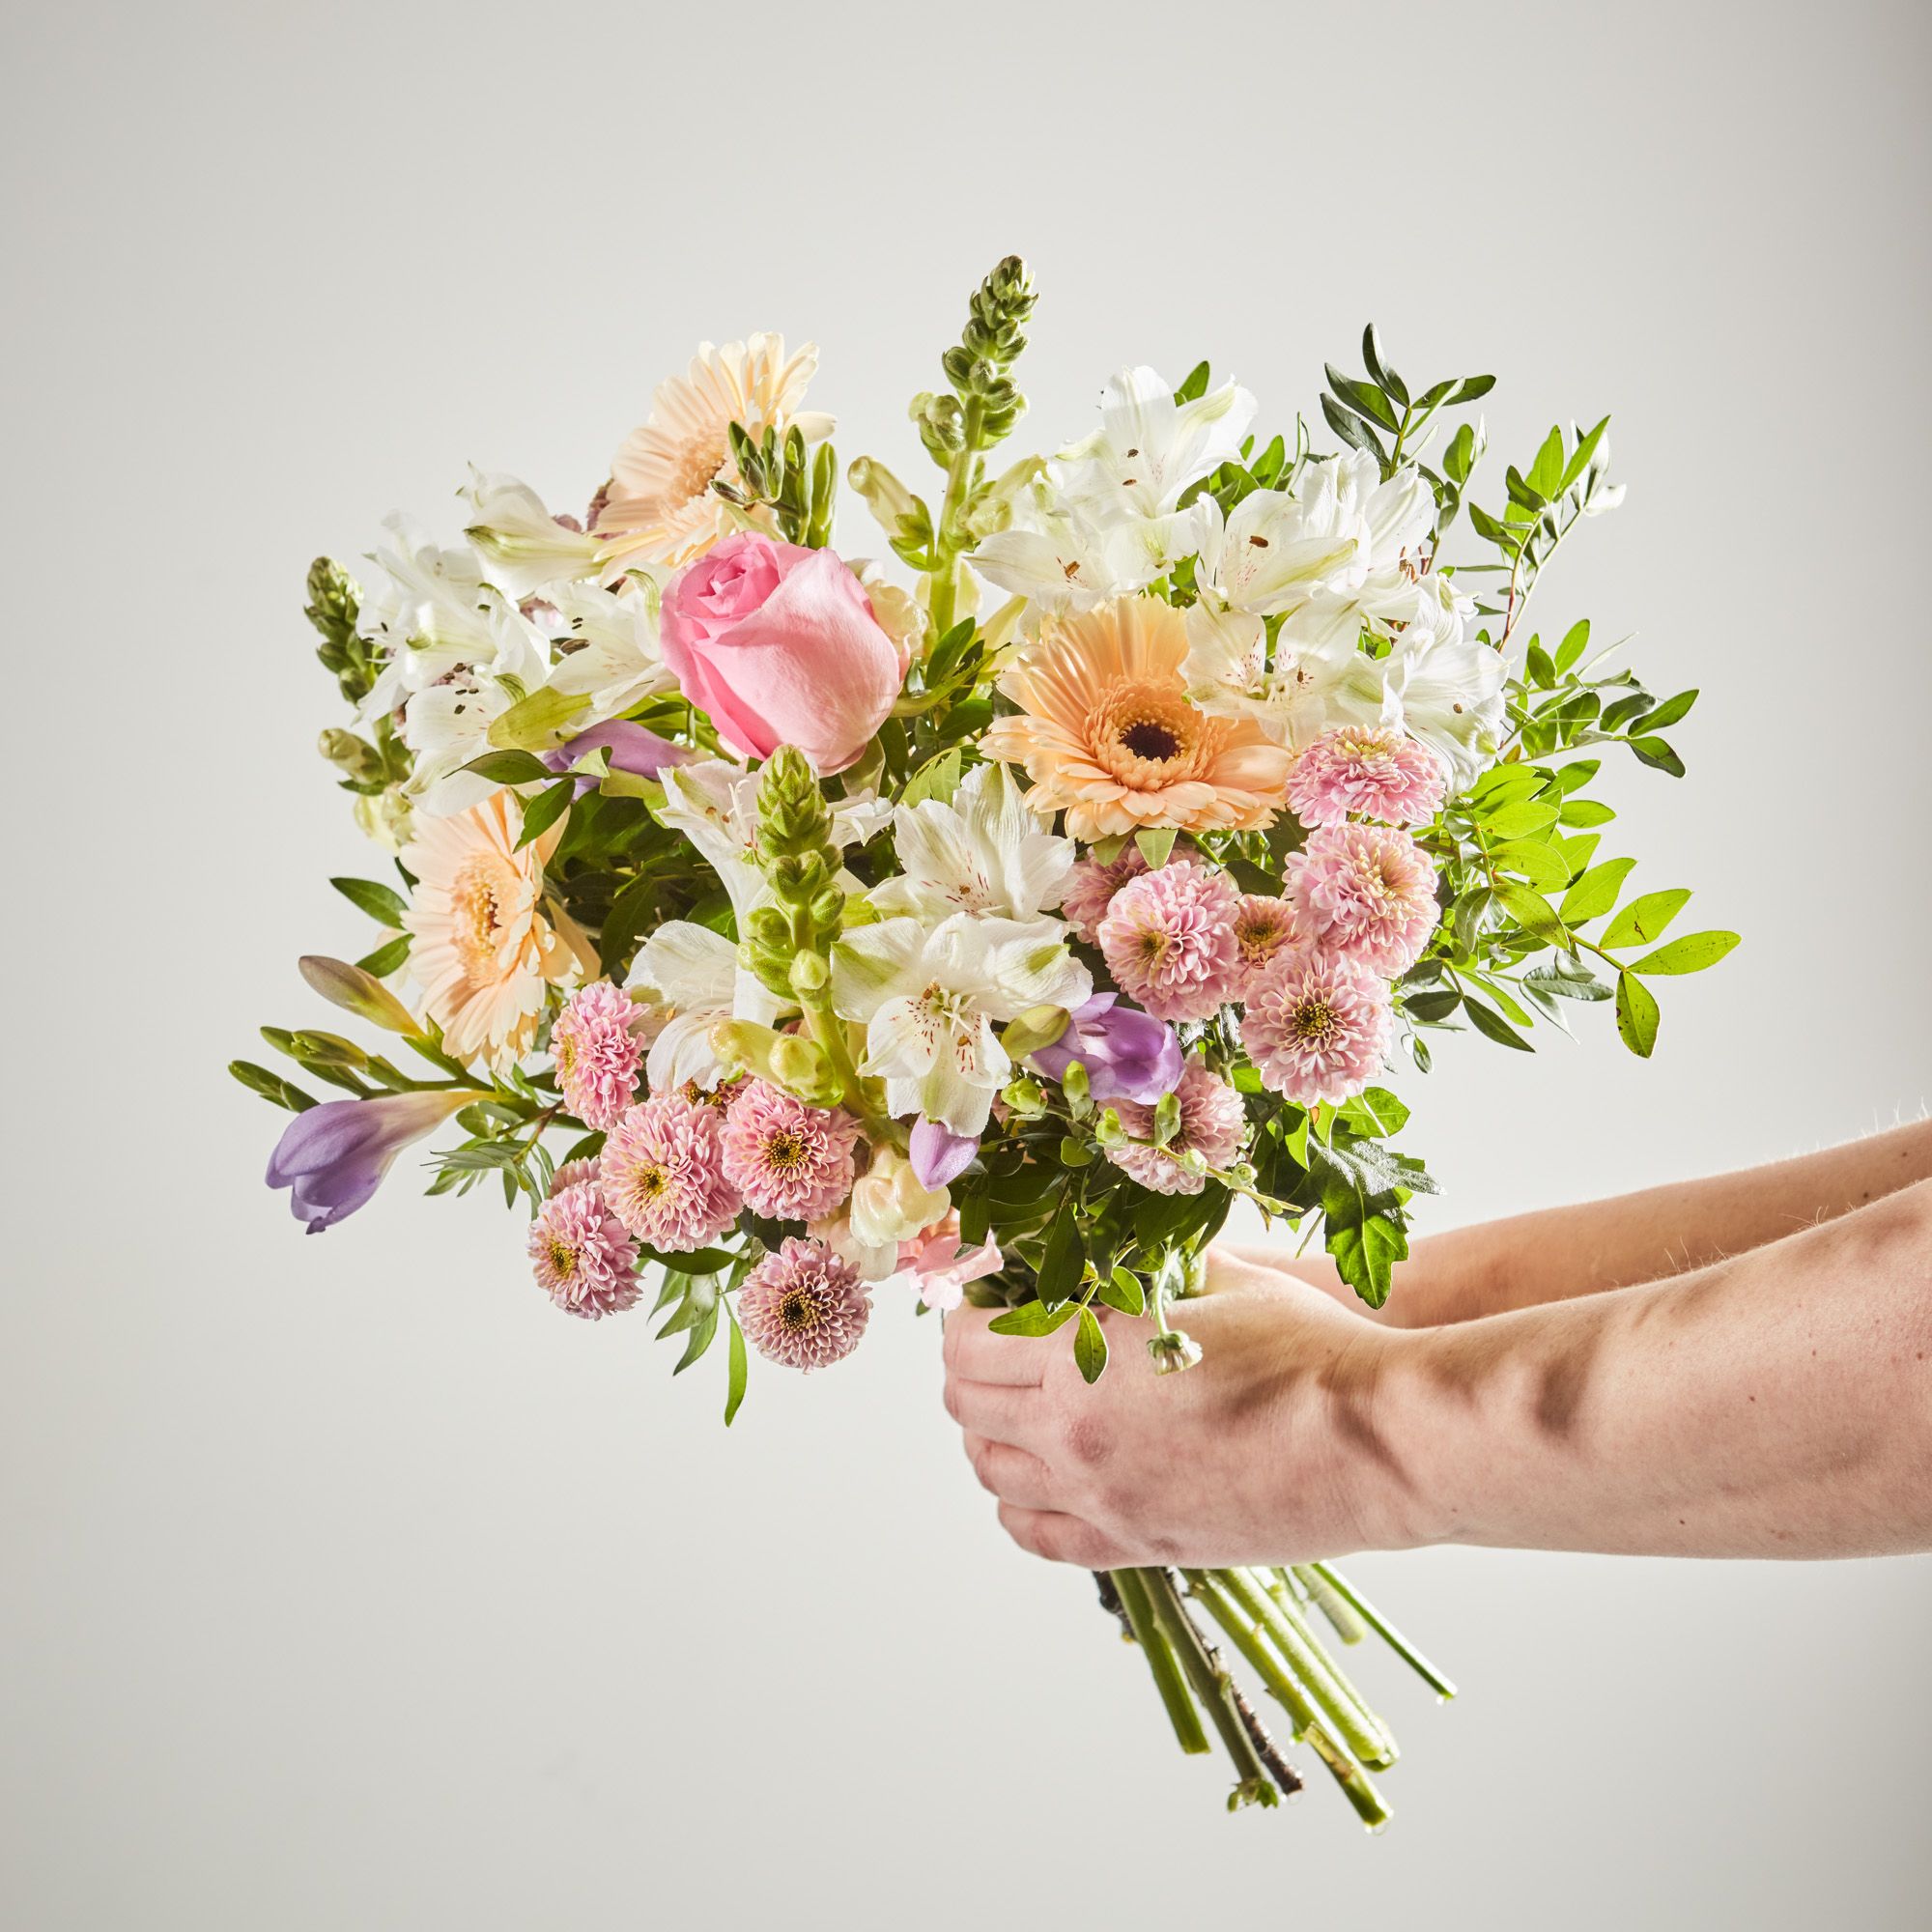 A pair of hands holds a bouquet of flowers into frame. The bouquet is a mix of pastel peach, pink and white.